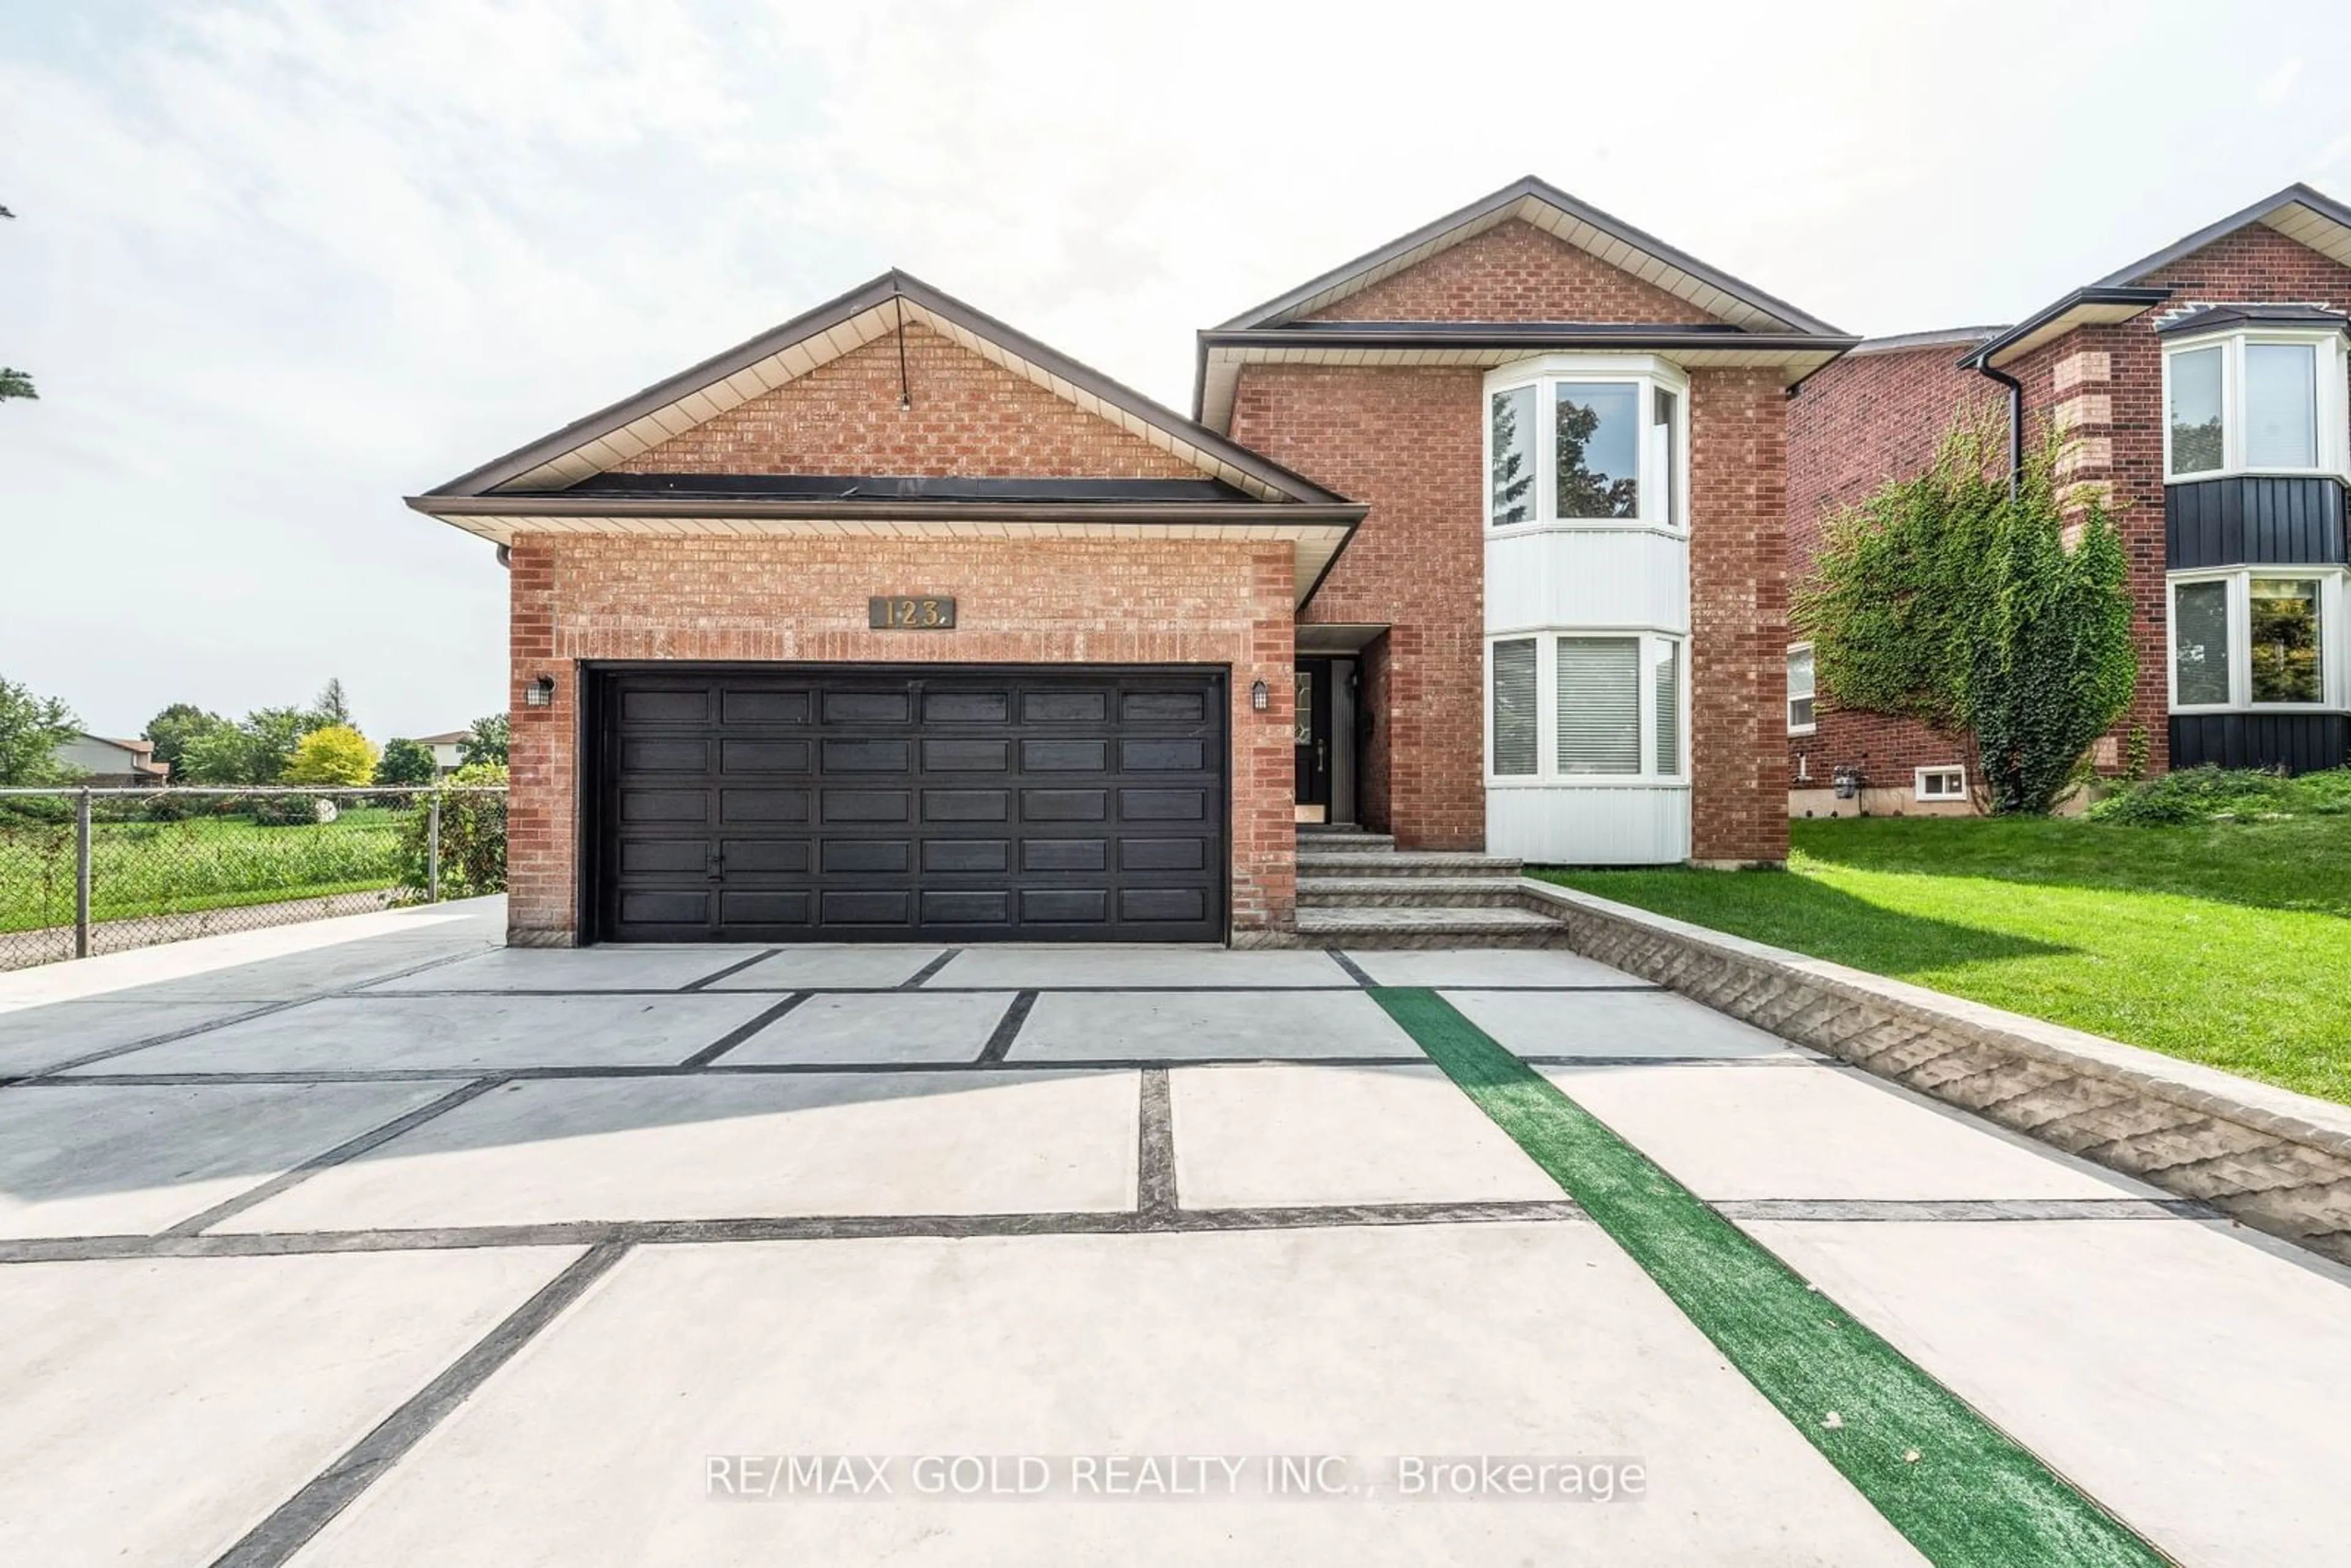 Home with brick exterior material for 123 Meadow Dr, Orangeville Ontario L6W 4J7